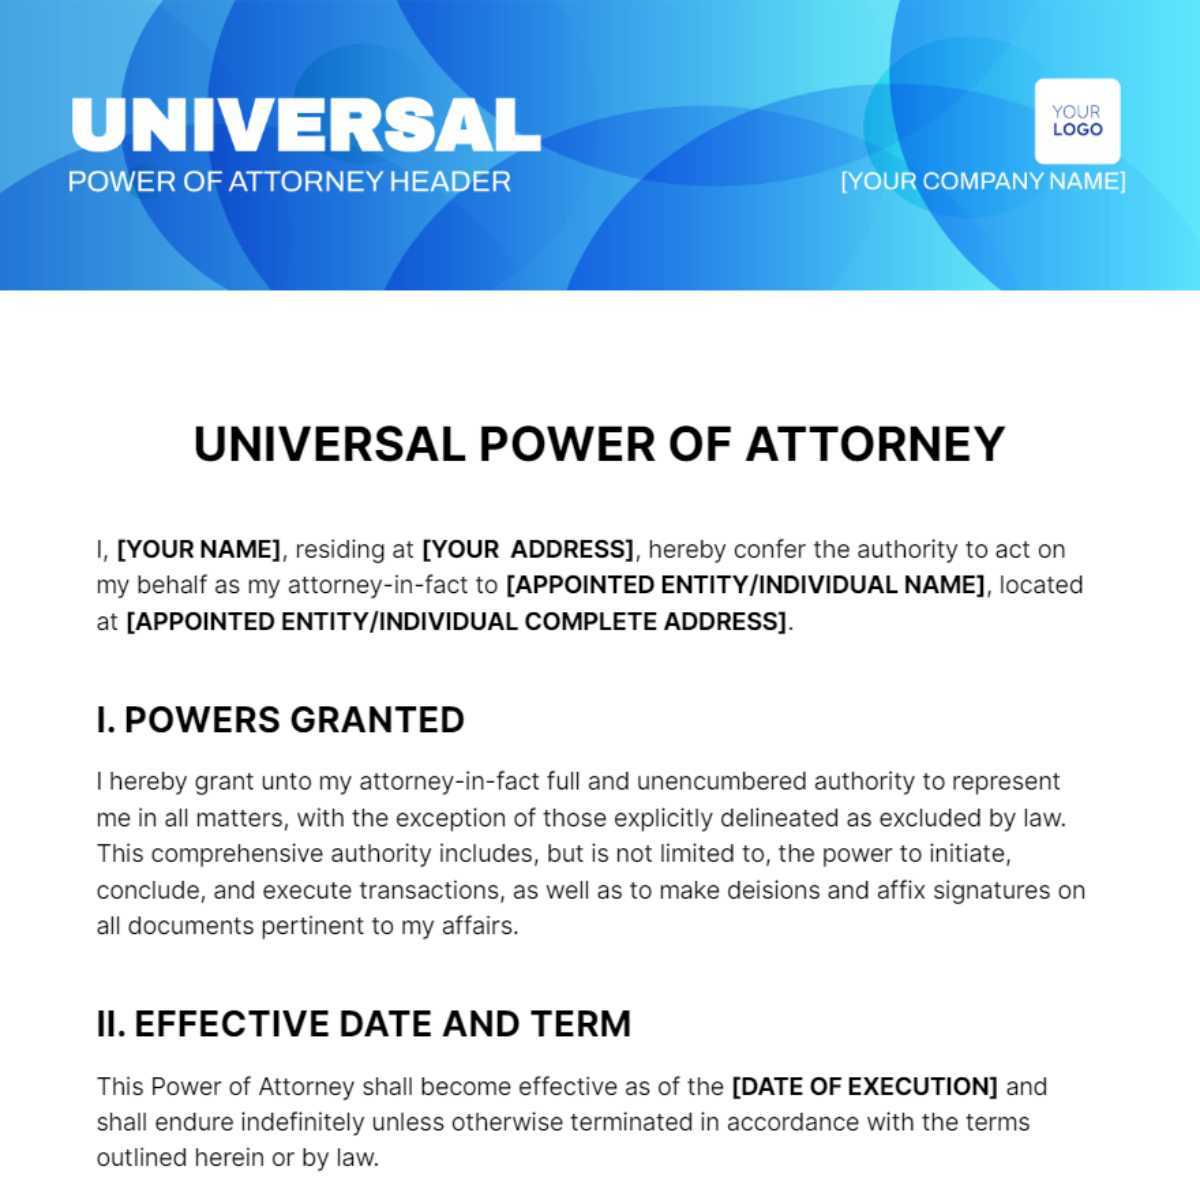 Universal Power of Attorney Template